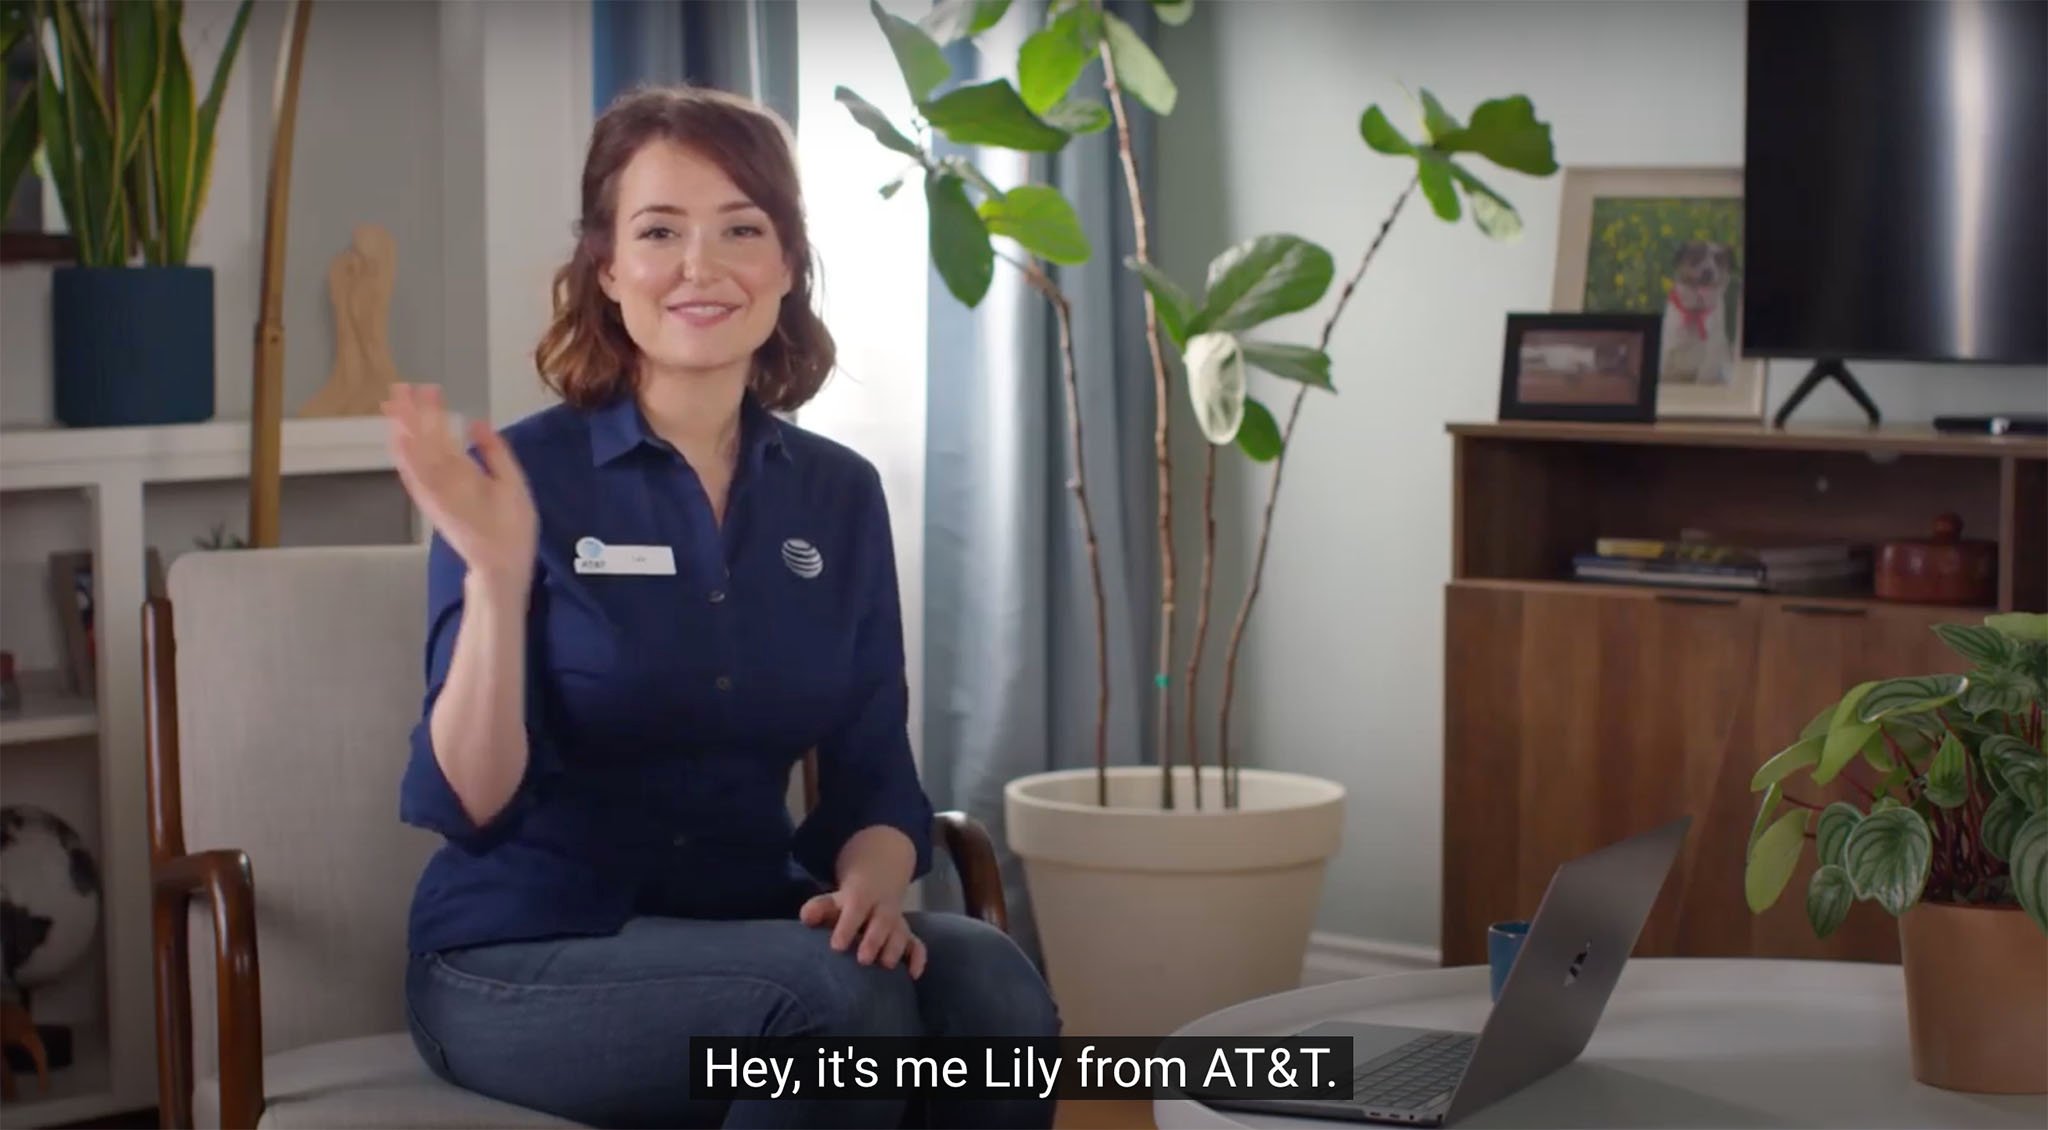 Milana Vayntrub is known for playing AT&T salesperson Lily James in AT&T commercials